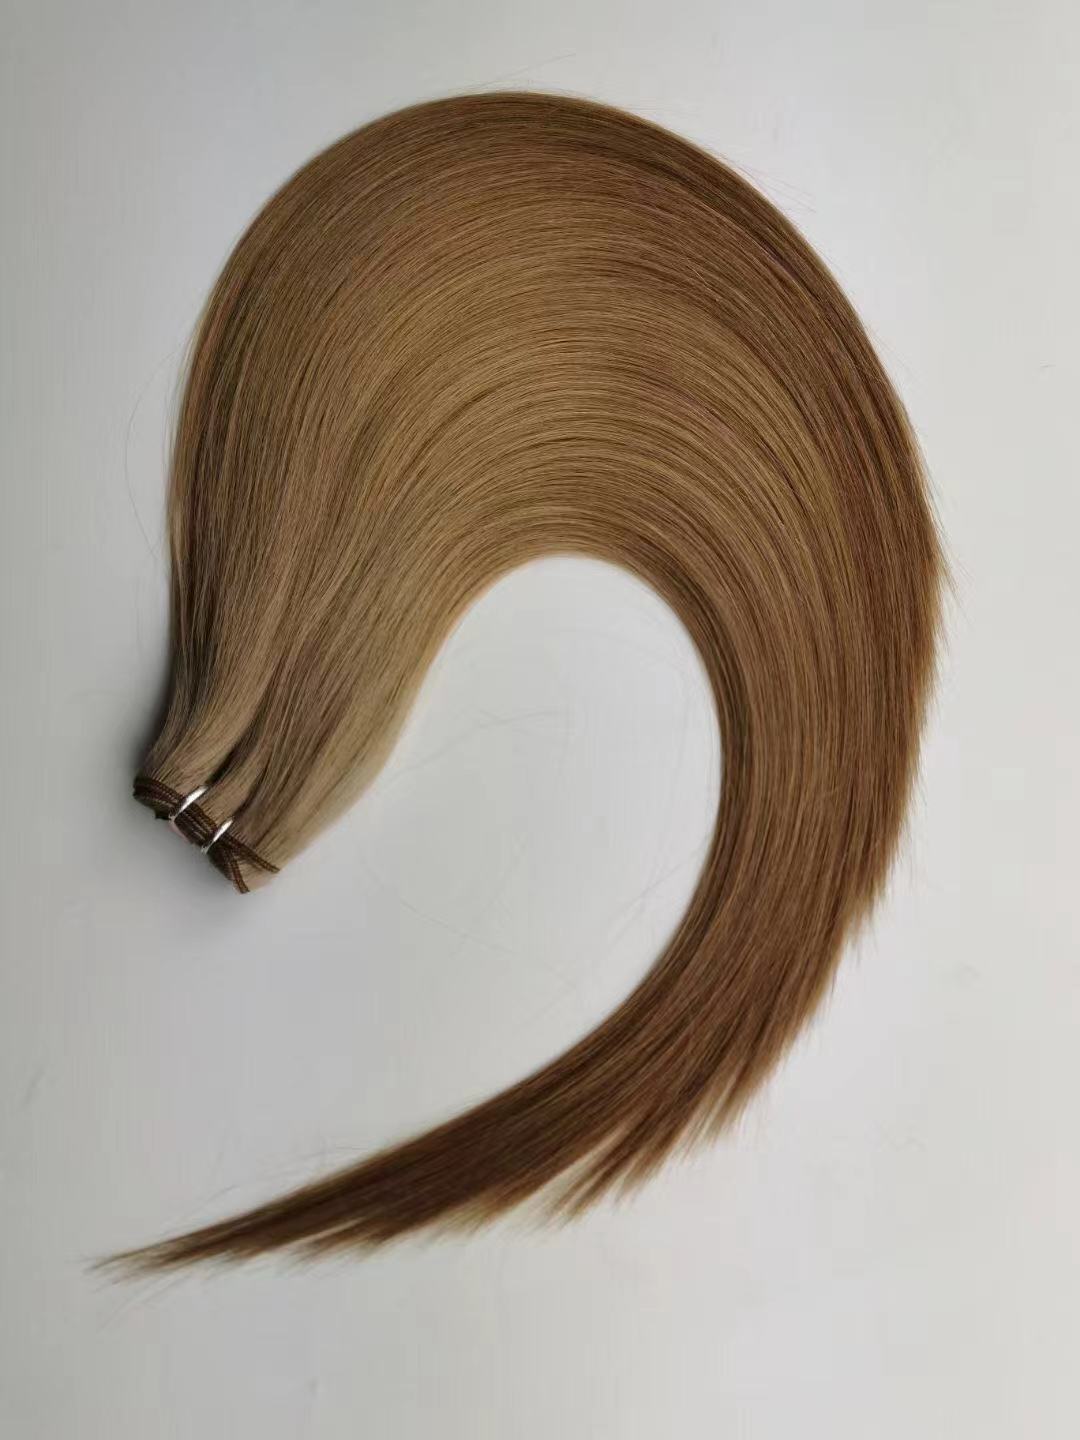 China remy hair weft hair extensions factory QM263